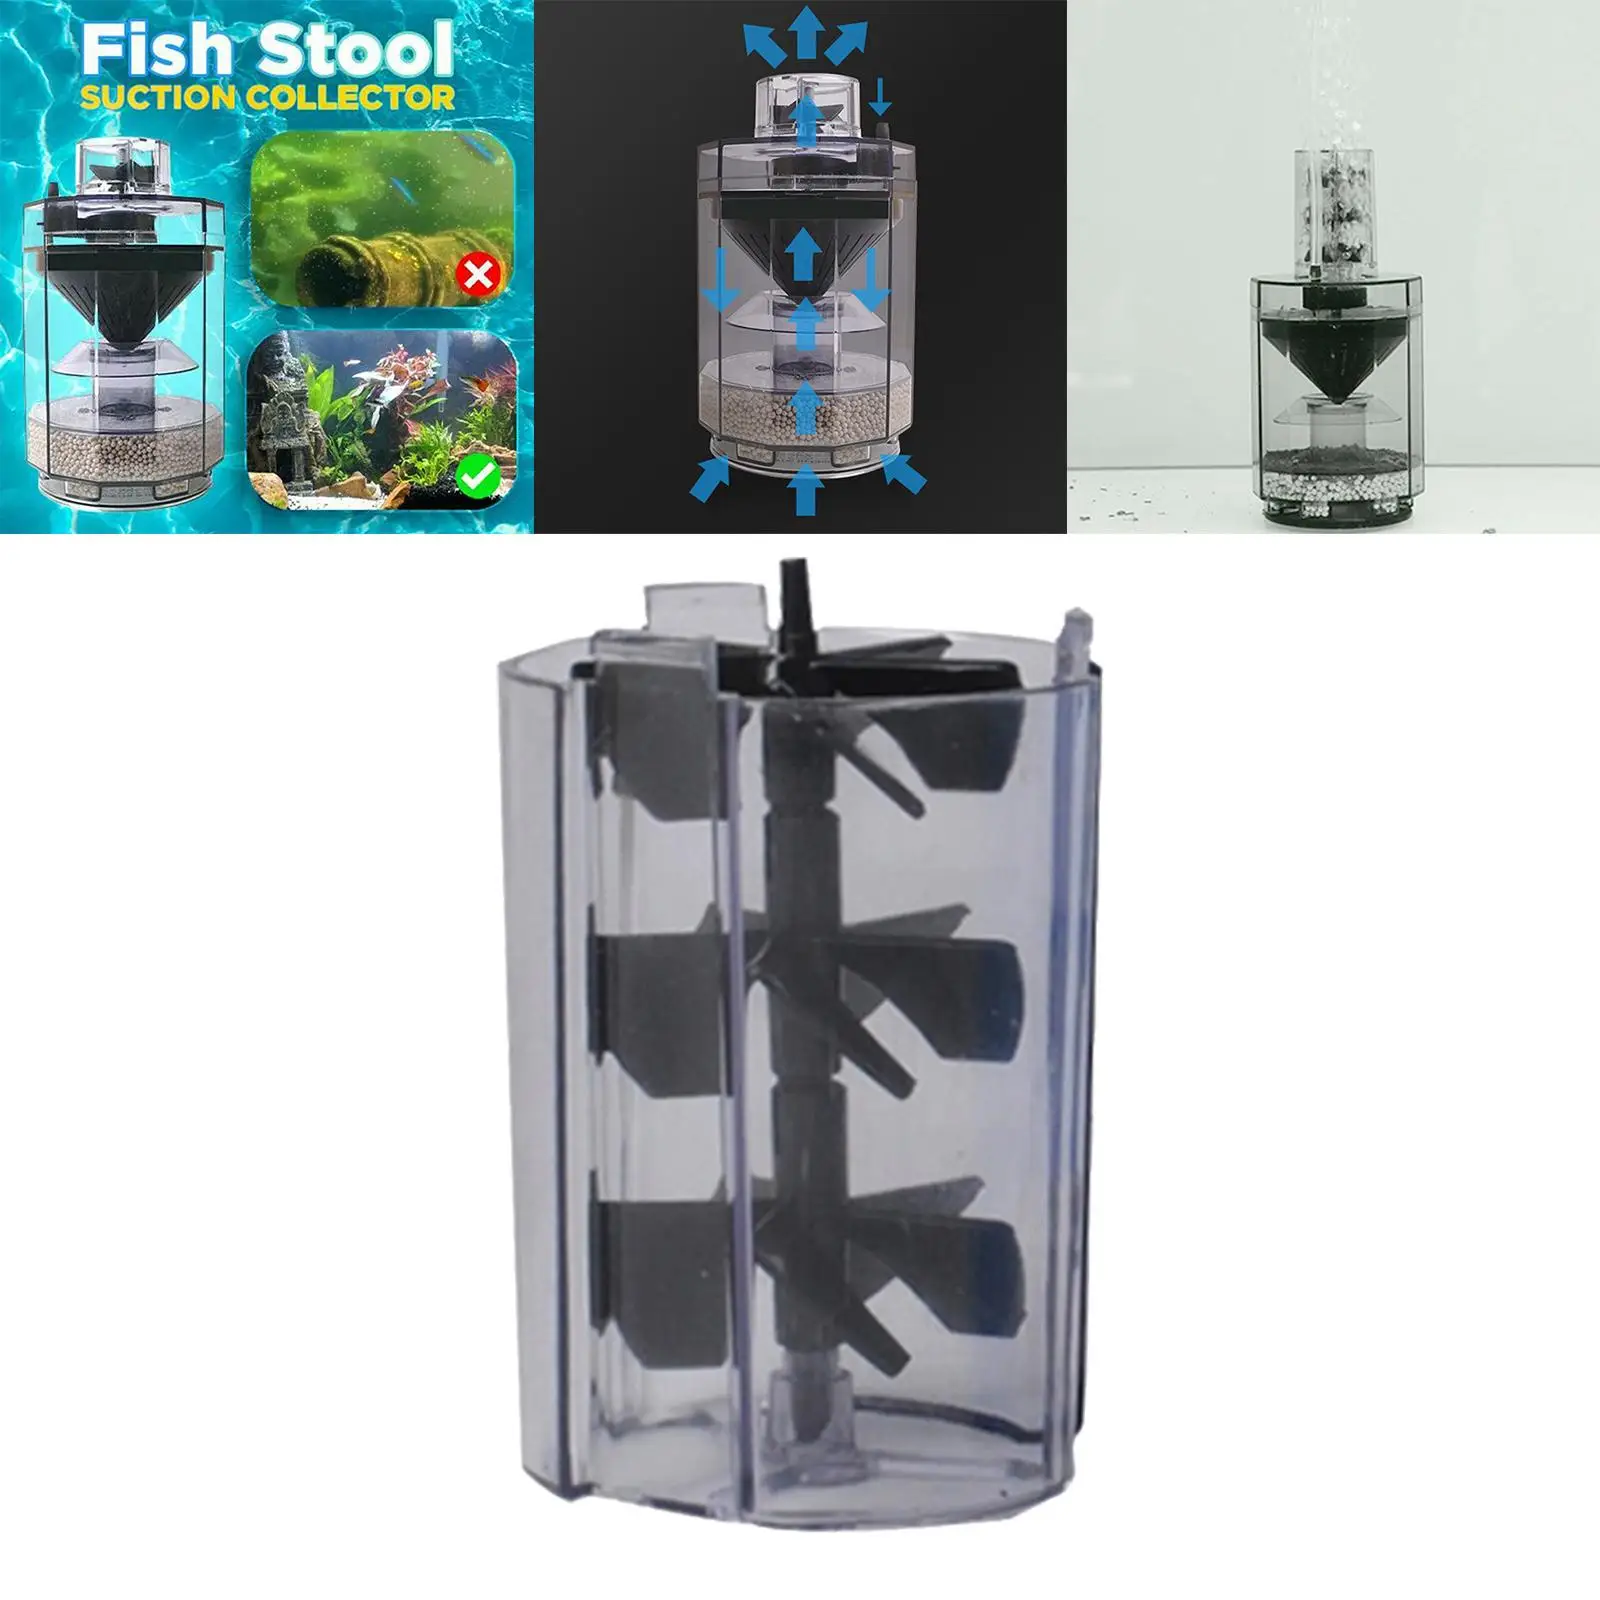 Spiral Fan for Aquarium Fish Stool Suction Collector Tank of Fish